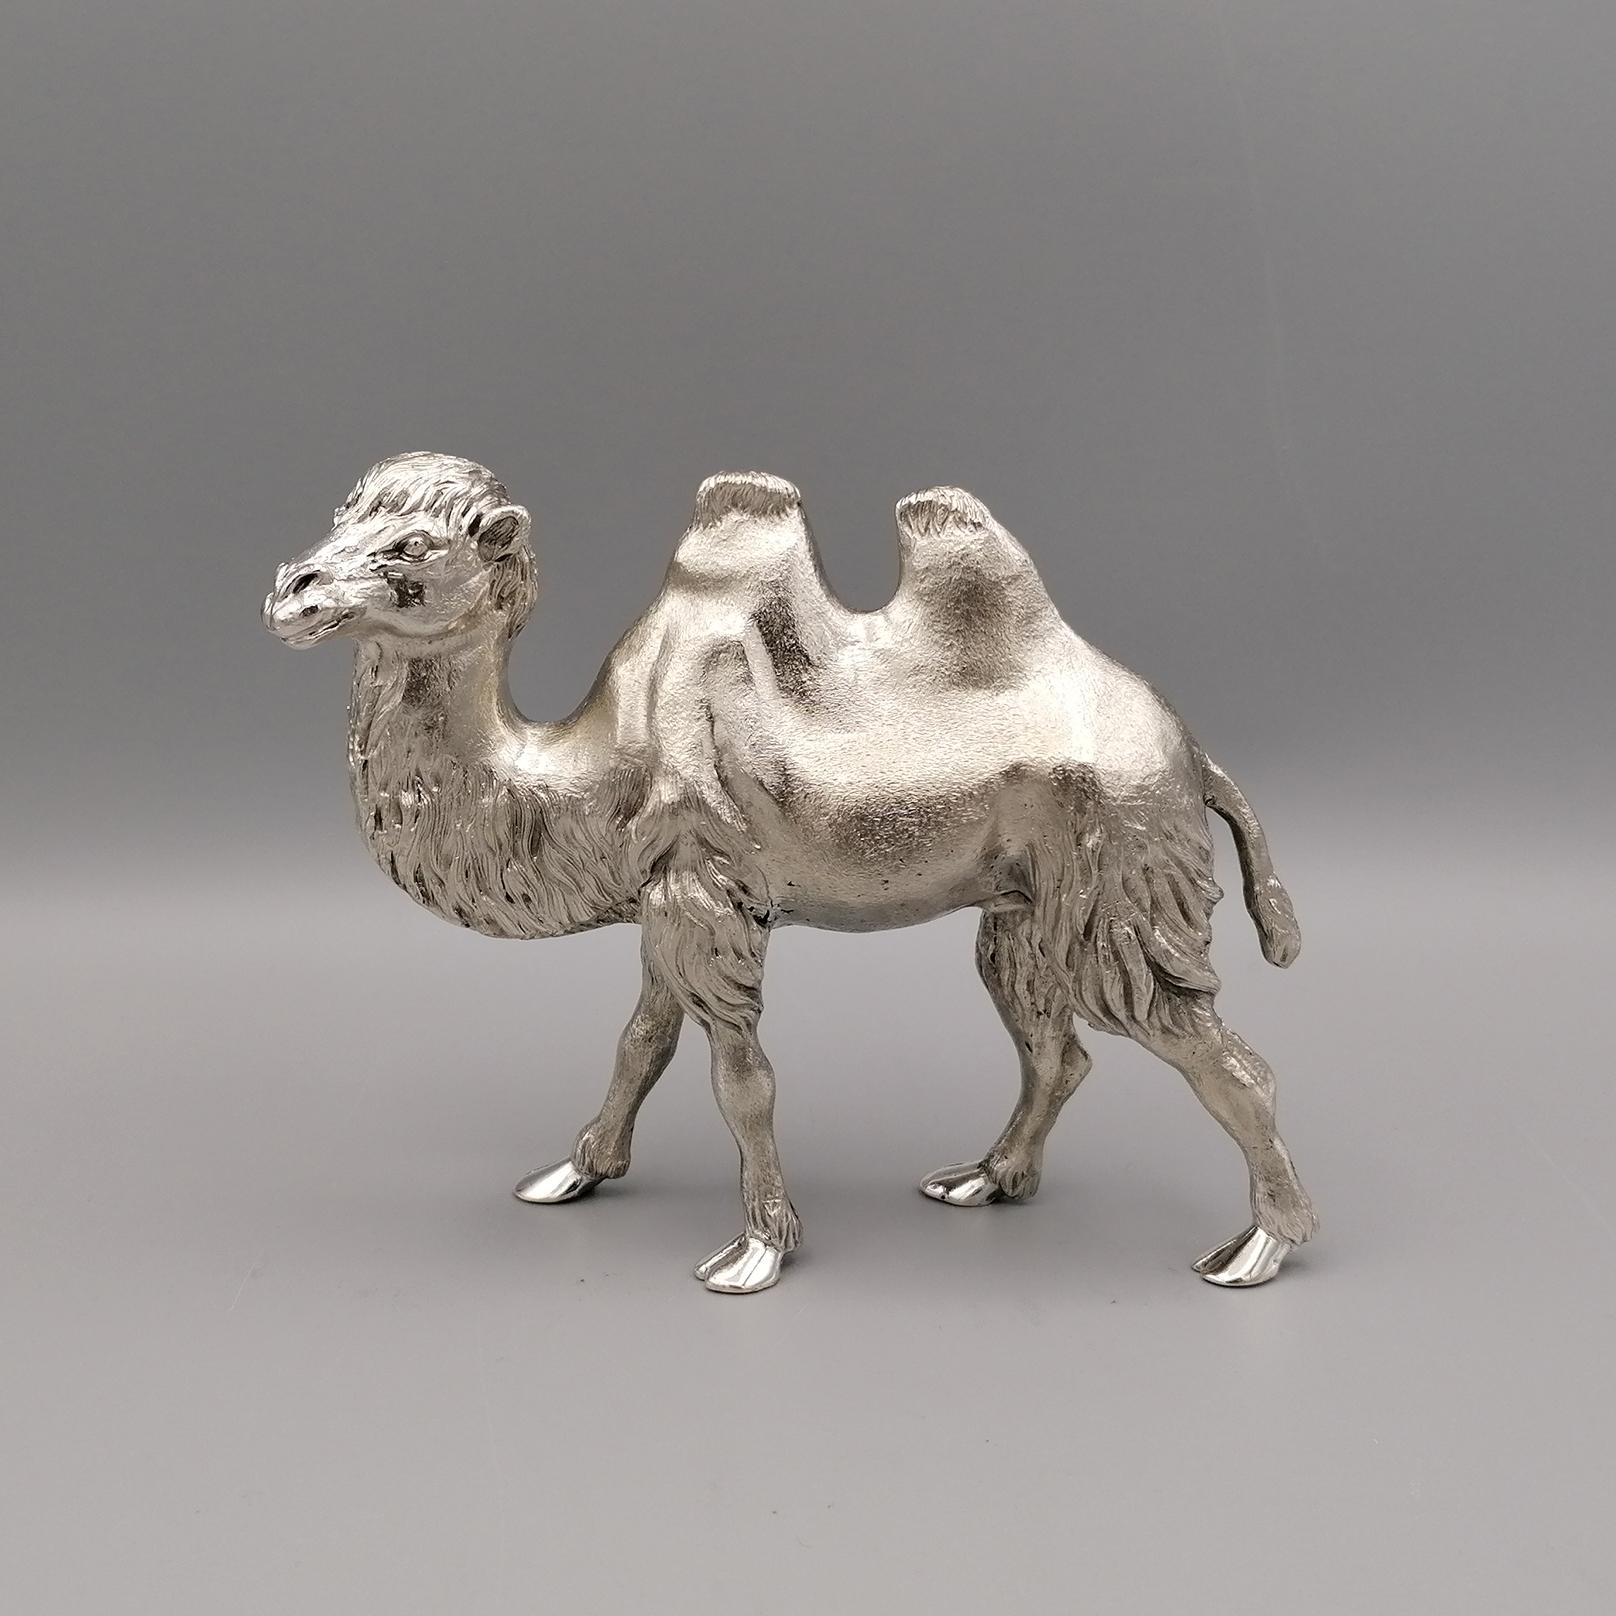 Solid 800 silver camel.
The sculpture was made with the casting technique and then finished completely by hand by expert chisellers to make the camel's fur realistic and the whole sculpture as a whole.

By Argenteria Ranzoni - Milan - Italy
for